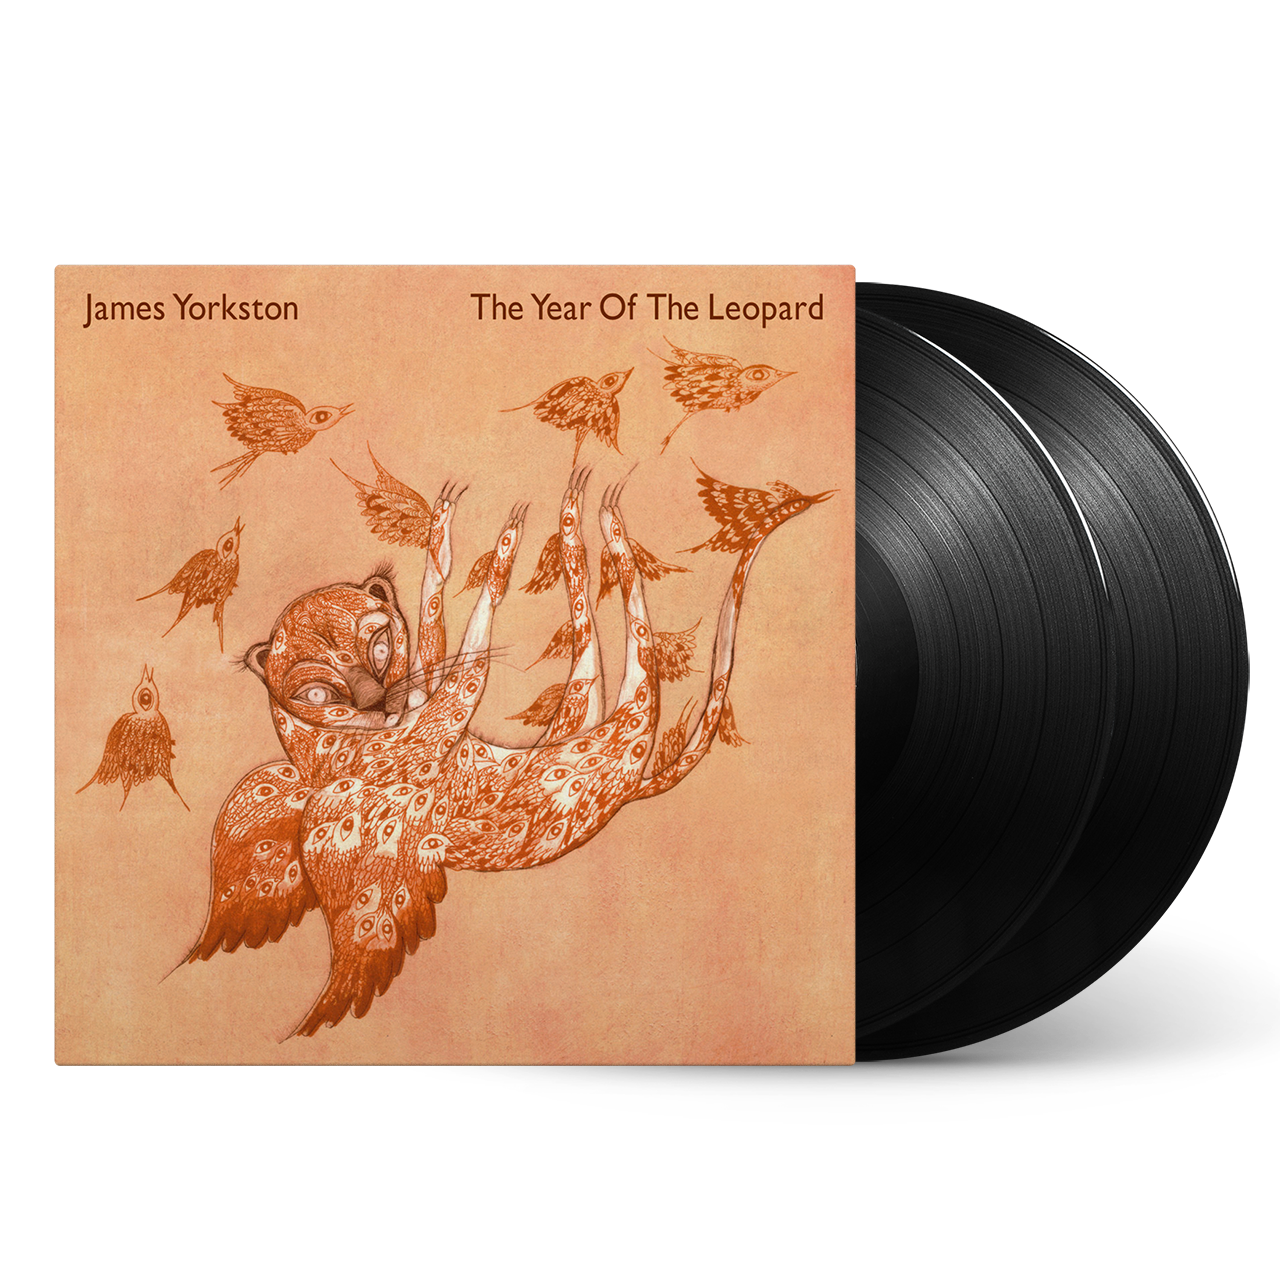 James Yorkston - The Year Of The Leopard: Vinyl 2LP